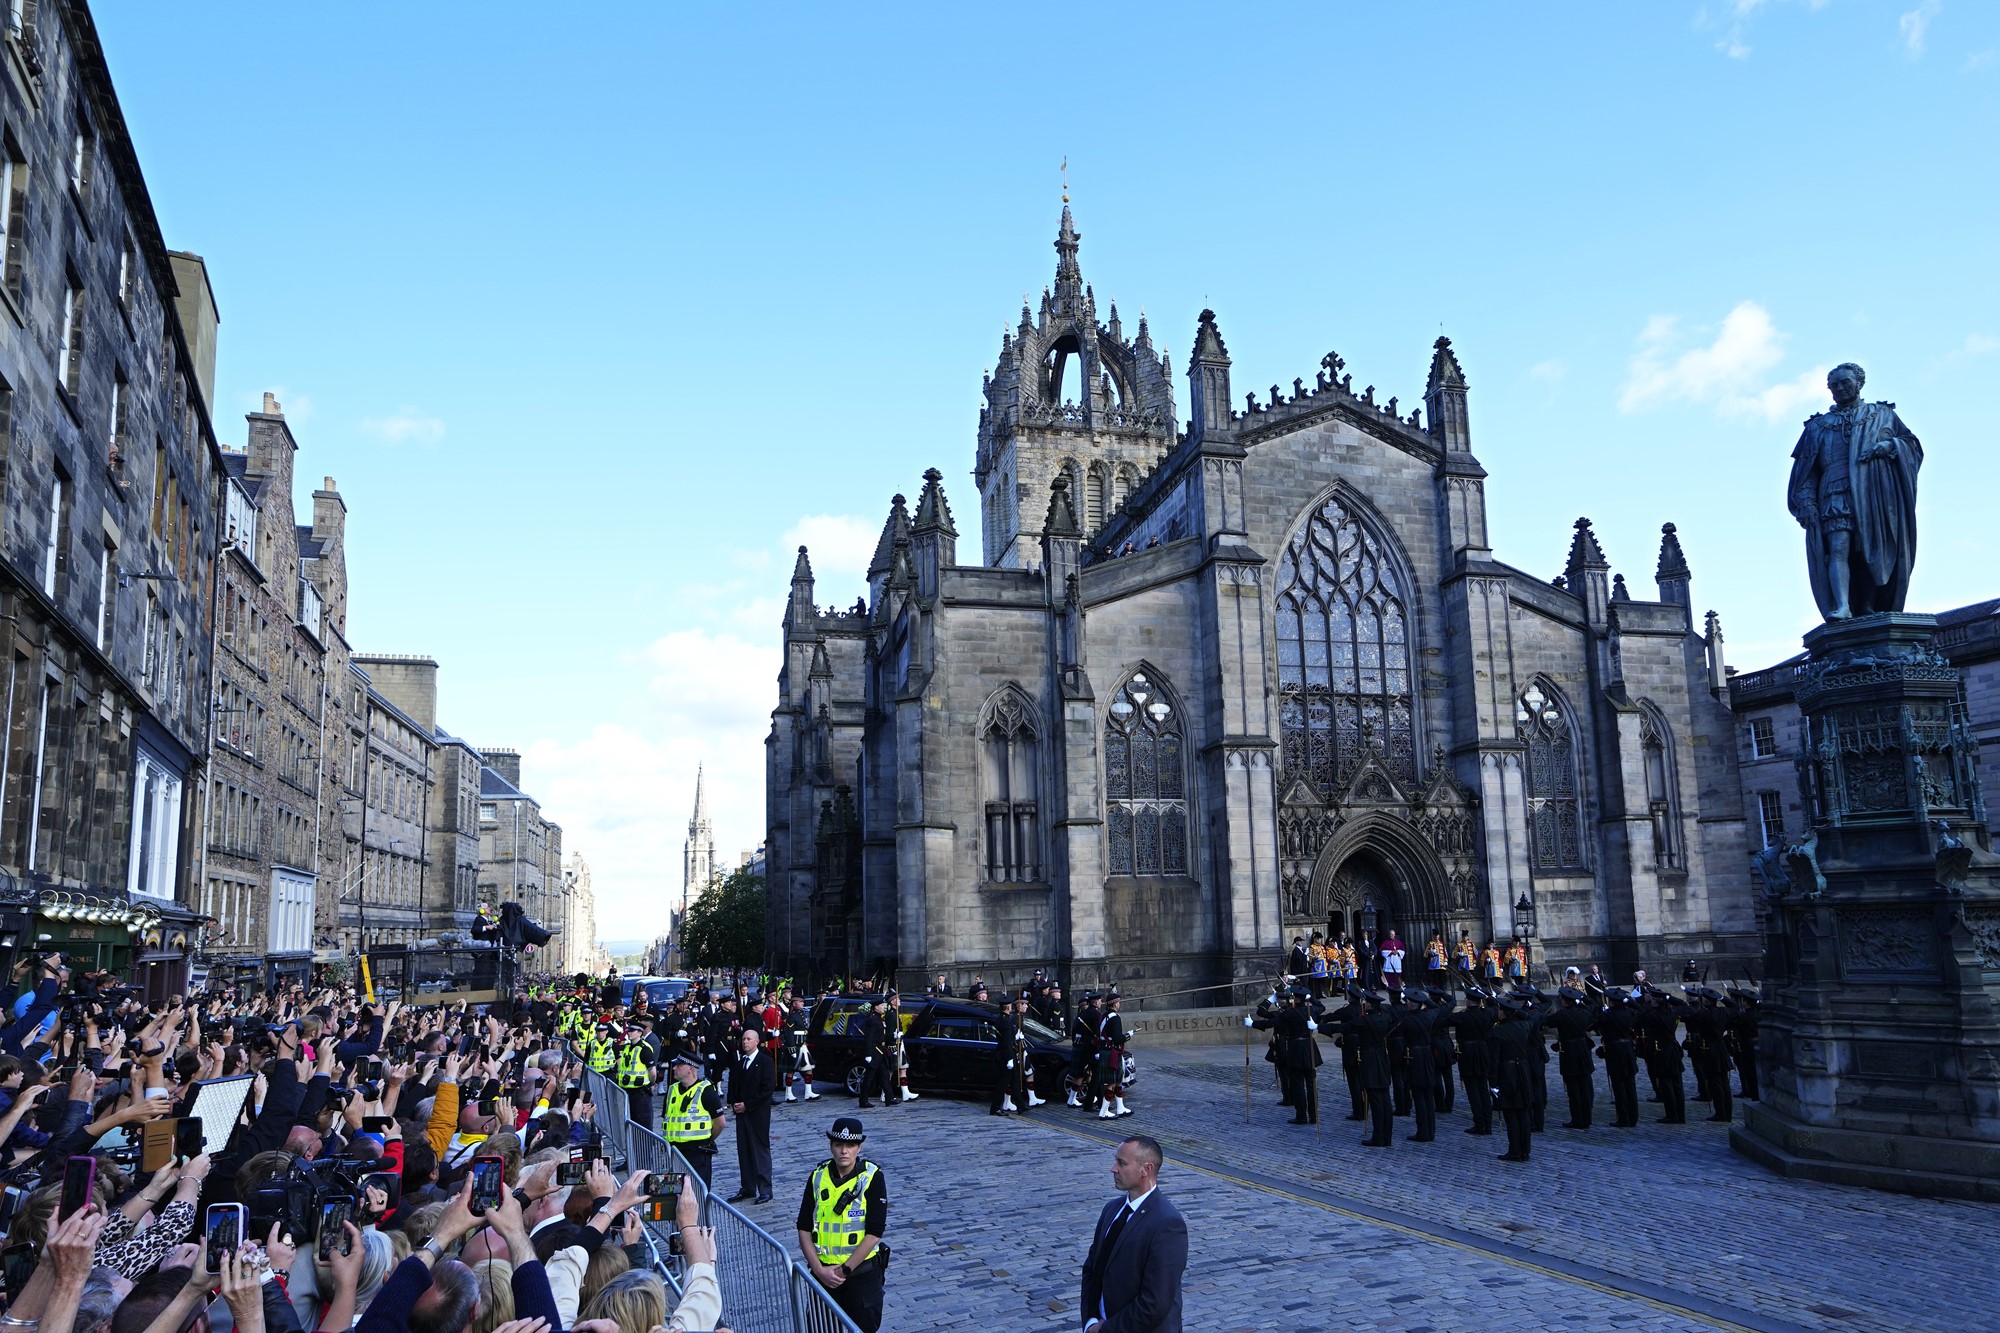 The hearse carrying Queen Elizabeth's coffin from the Palace of Holyroodhouse arrives to St Giles Cathedral